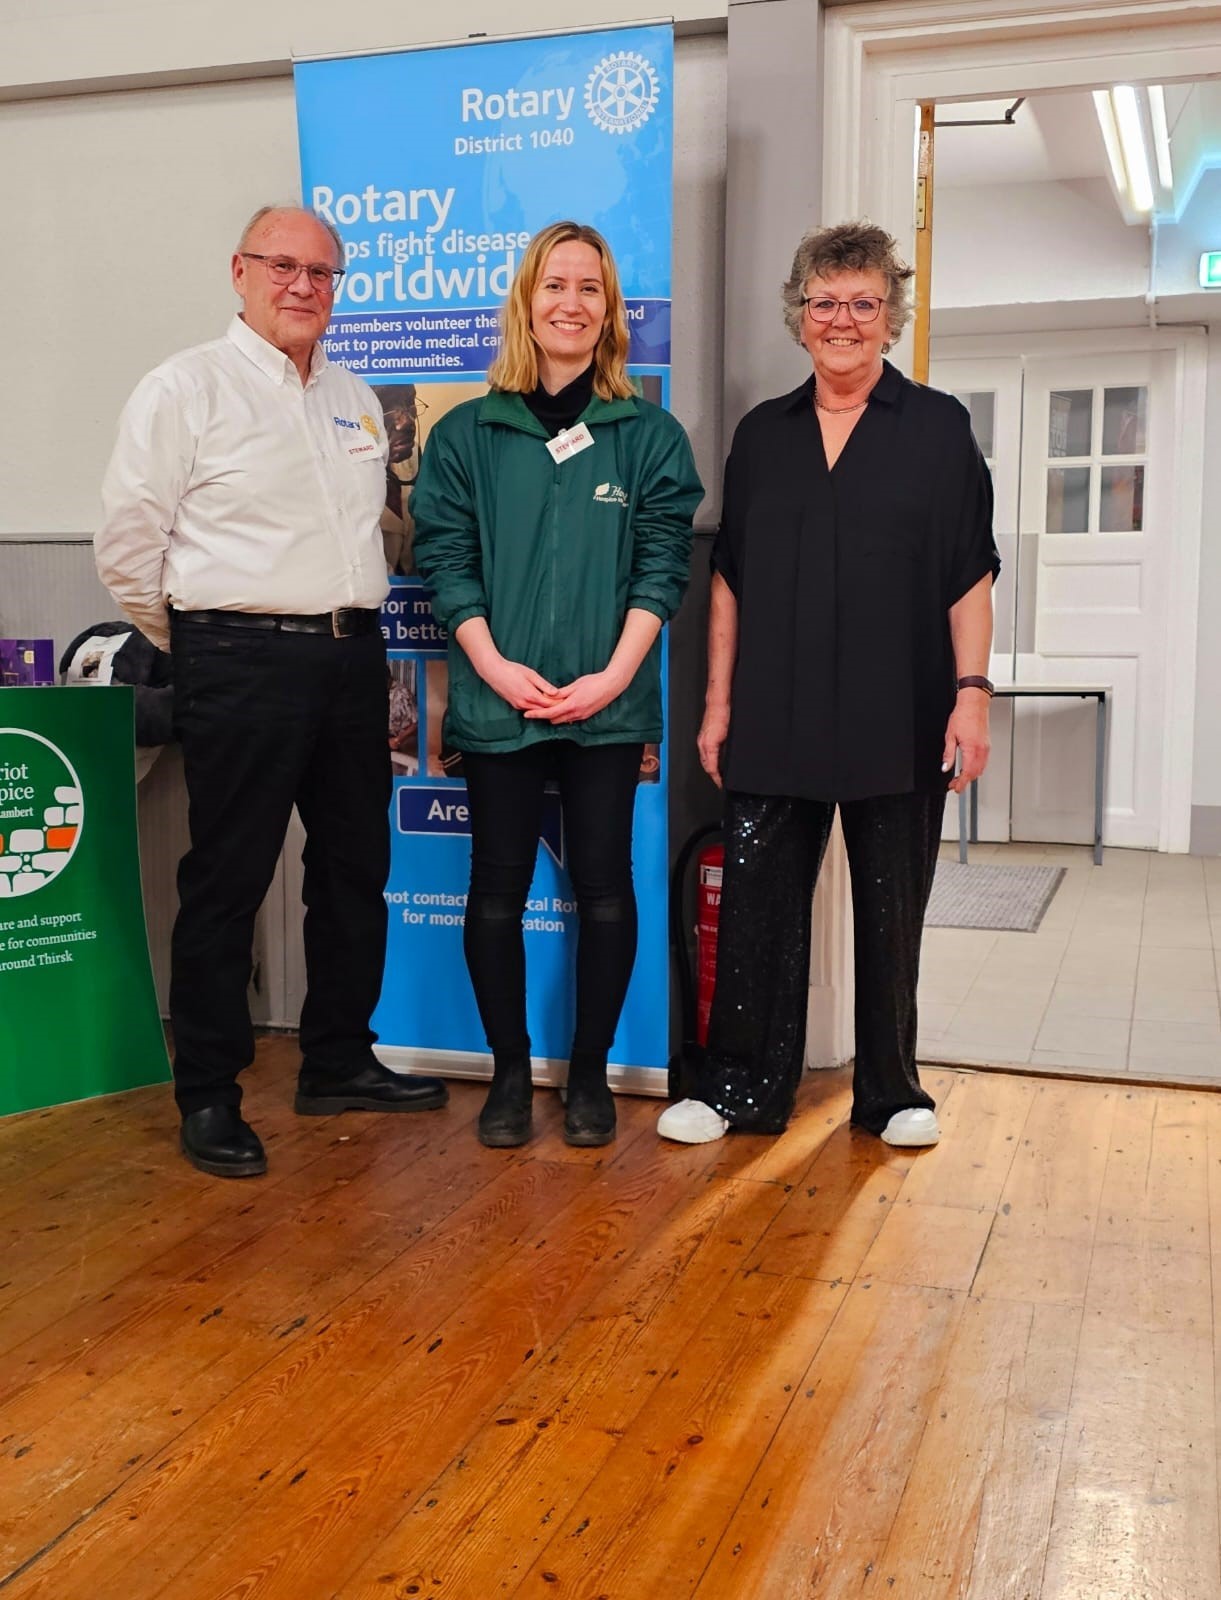 Stephen Ellis, of the Rotary club of Thirsk, Lucy Turner, of Herriot Hospice Homecare, and Susan Rogers, of the Rotary club of Adventurers and SJB band leader